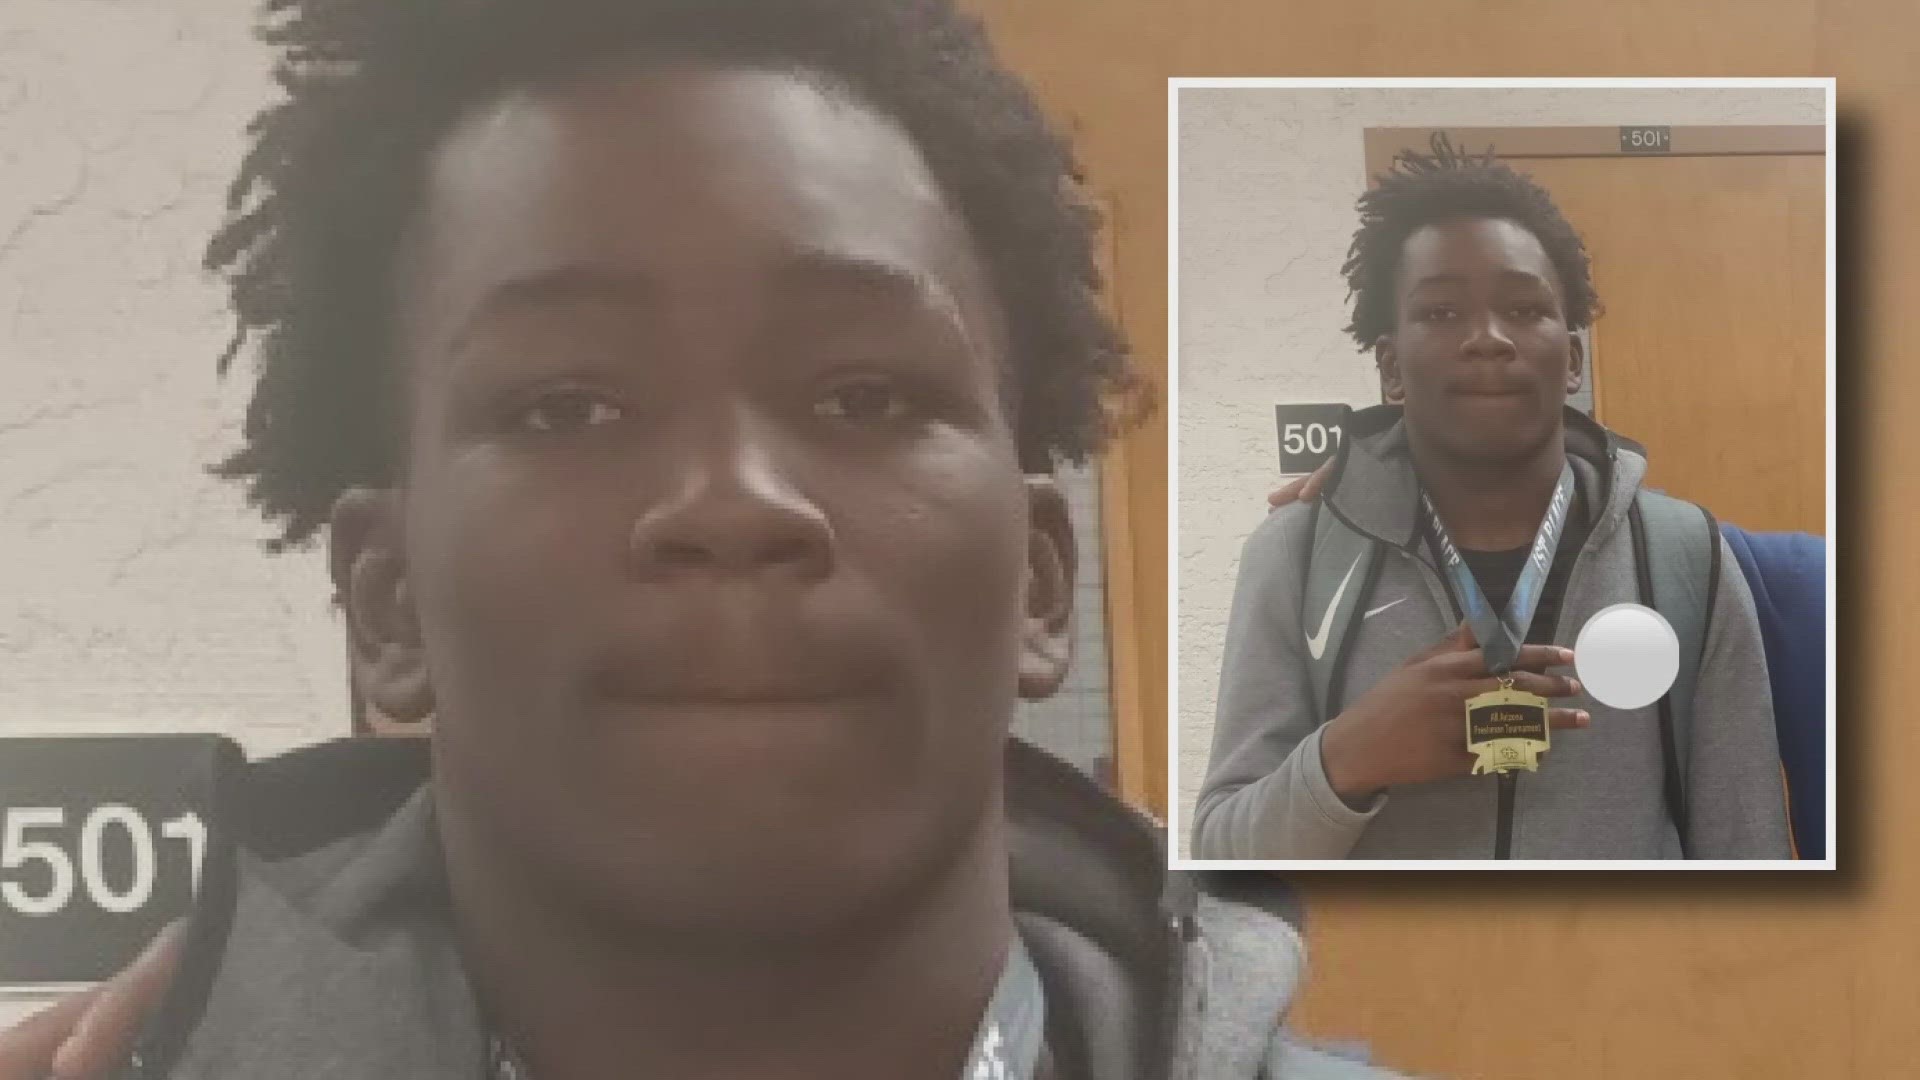 Christopher Hampton, a student at Cesar Chavez High School, went missing on the lake on July 17 and his body was found the next day at the bottom of the lake.